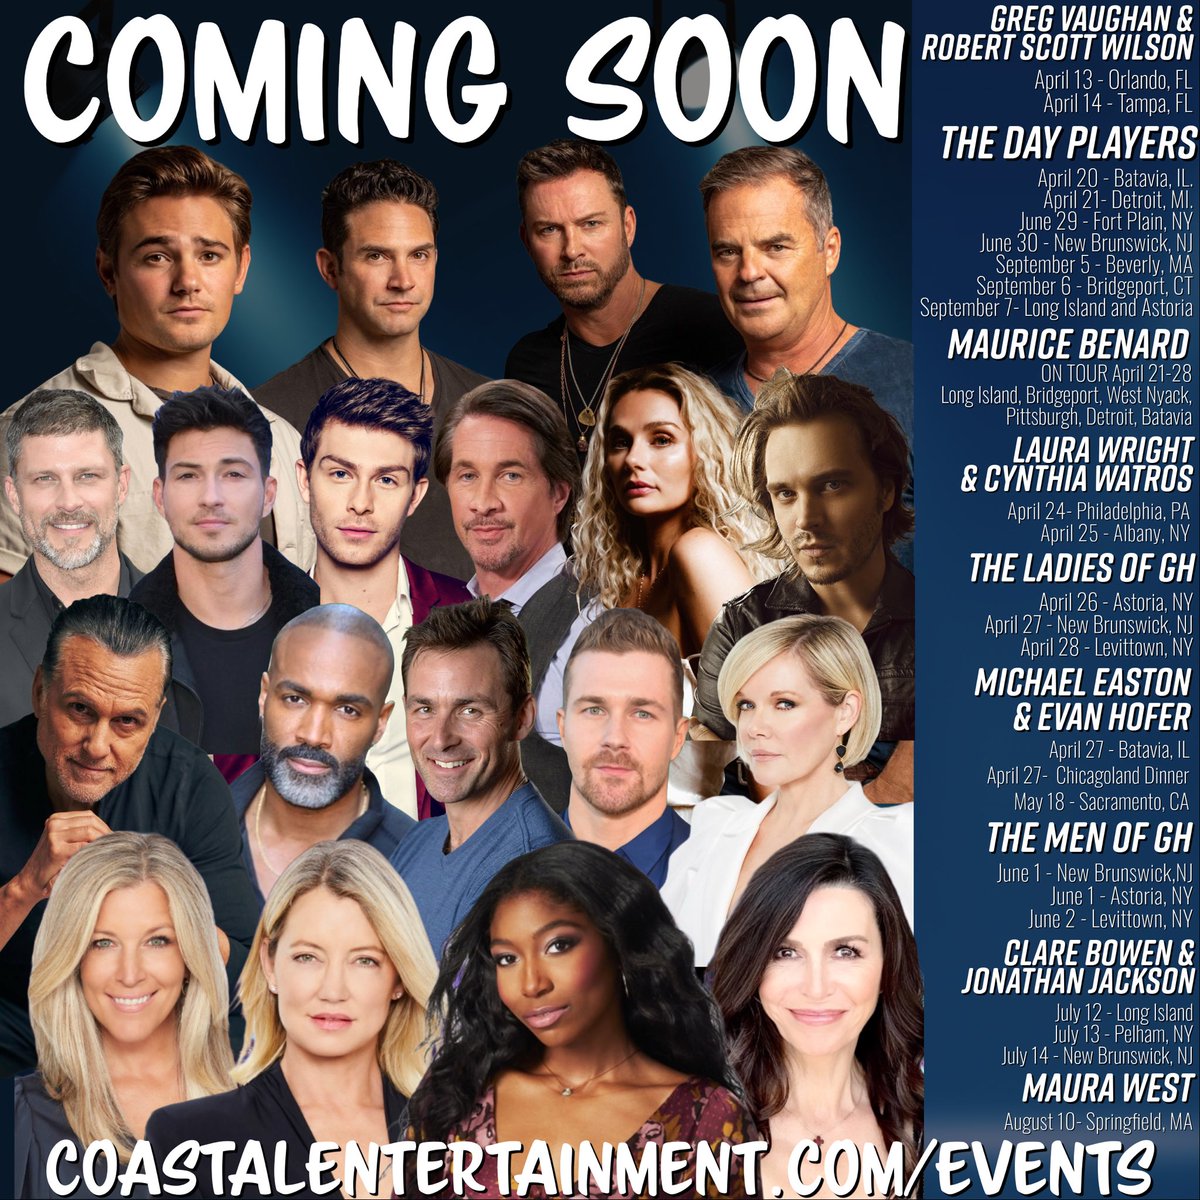 We are working on more surprises for #2024 but in the meantime, check out our events with your favs! #ComingSoon @ericmartsolf @wallykurth @CarsonBoatman @BrandonBarash @greg_vaughan @MrRobertScott @lldubs @iamaliford @JonathanJackson @EvanHofer @MauraWest @MauriceBenard